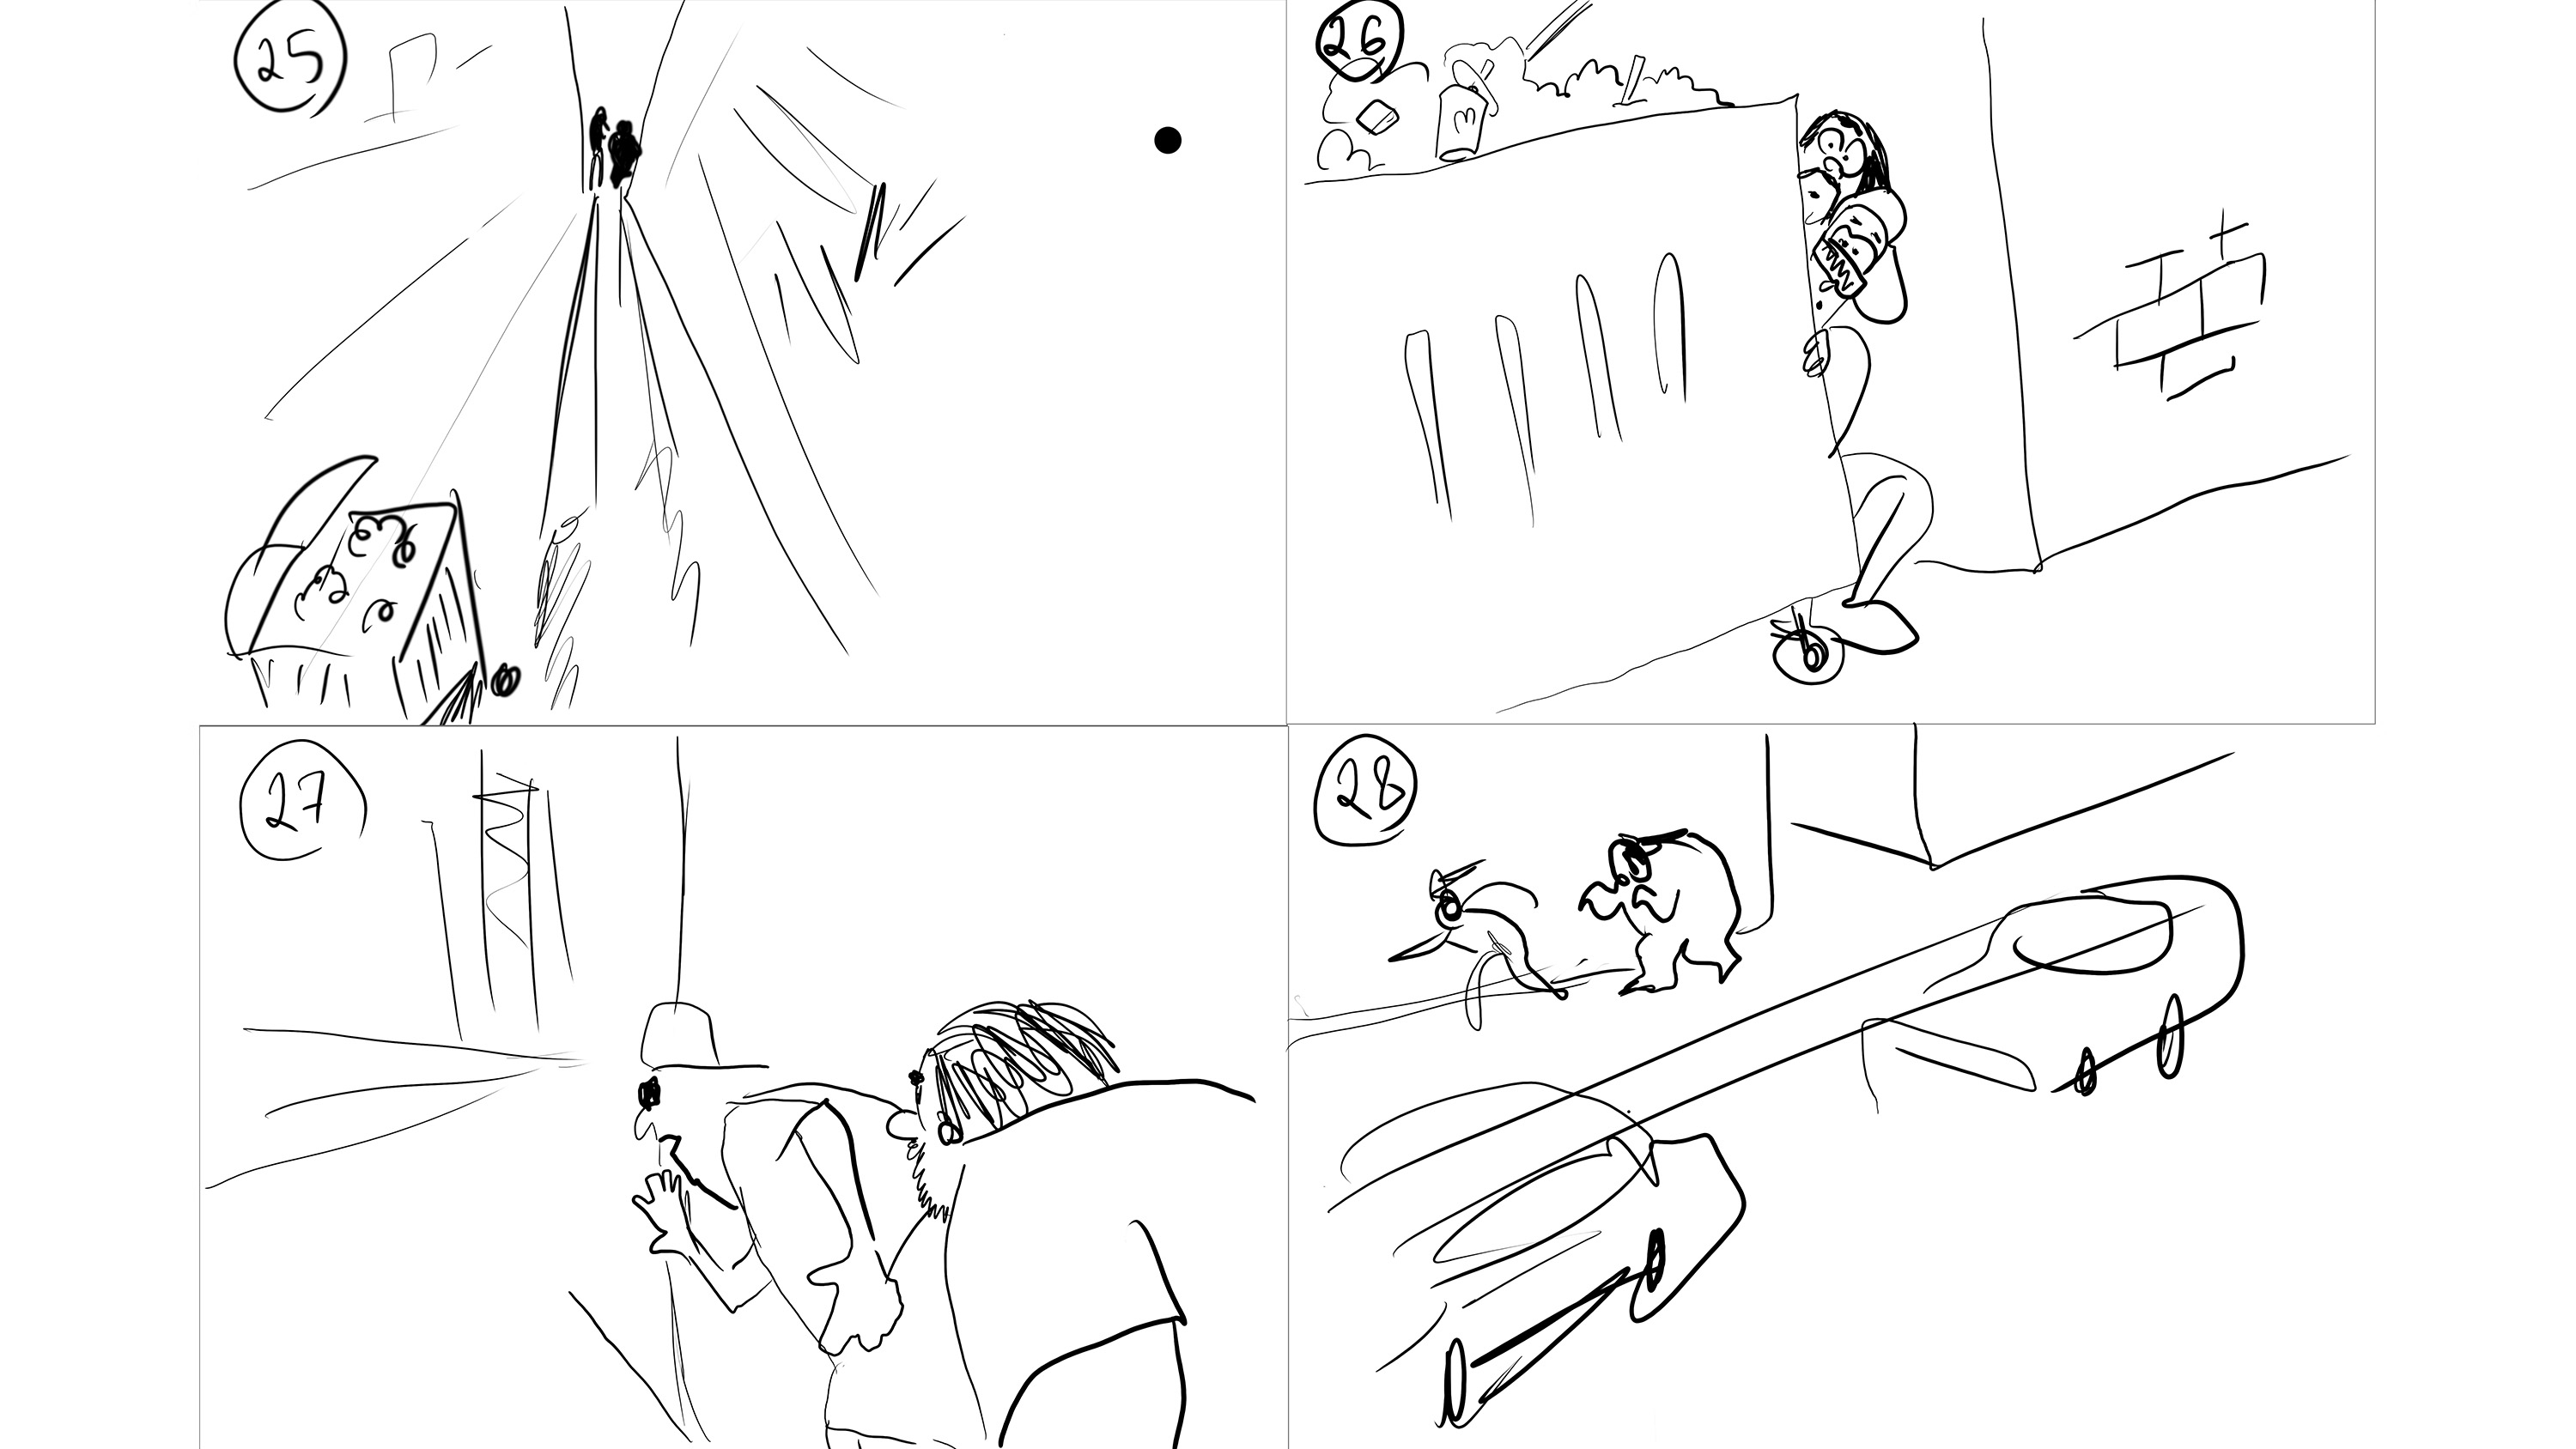 How to make a storyboard